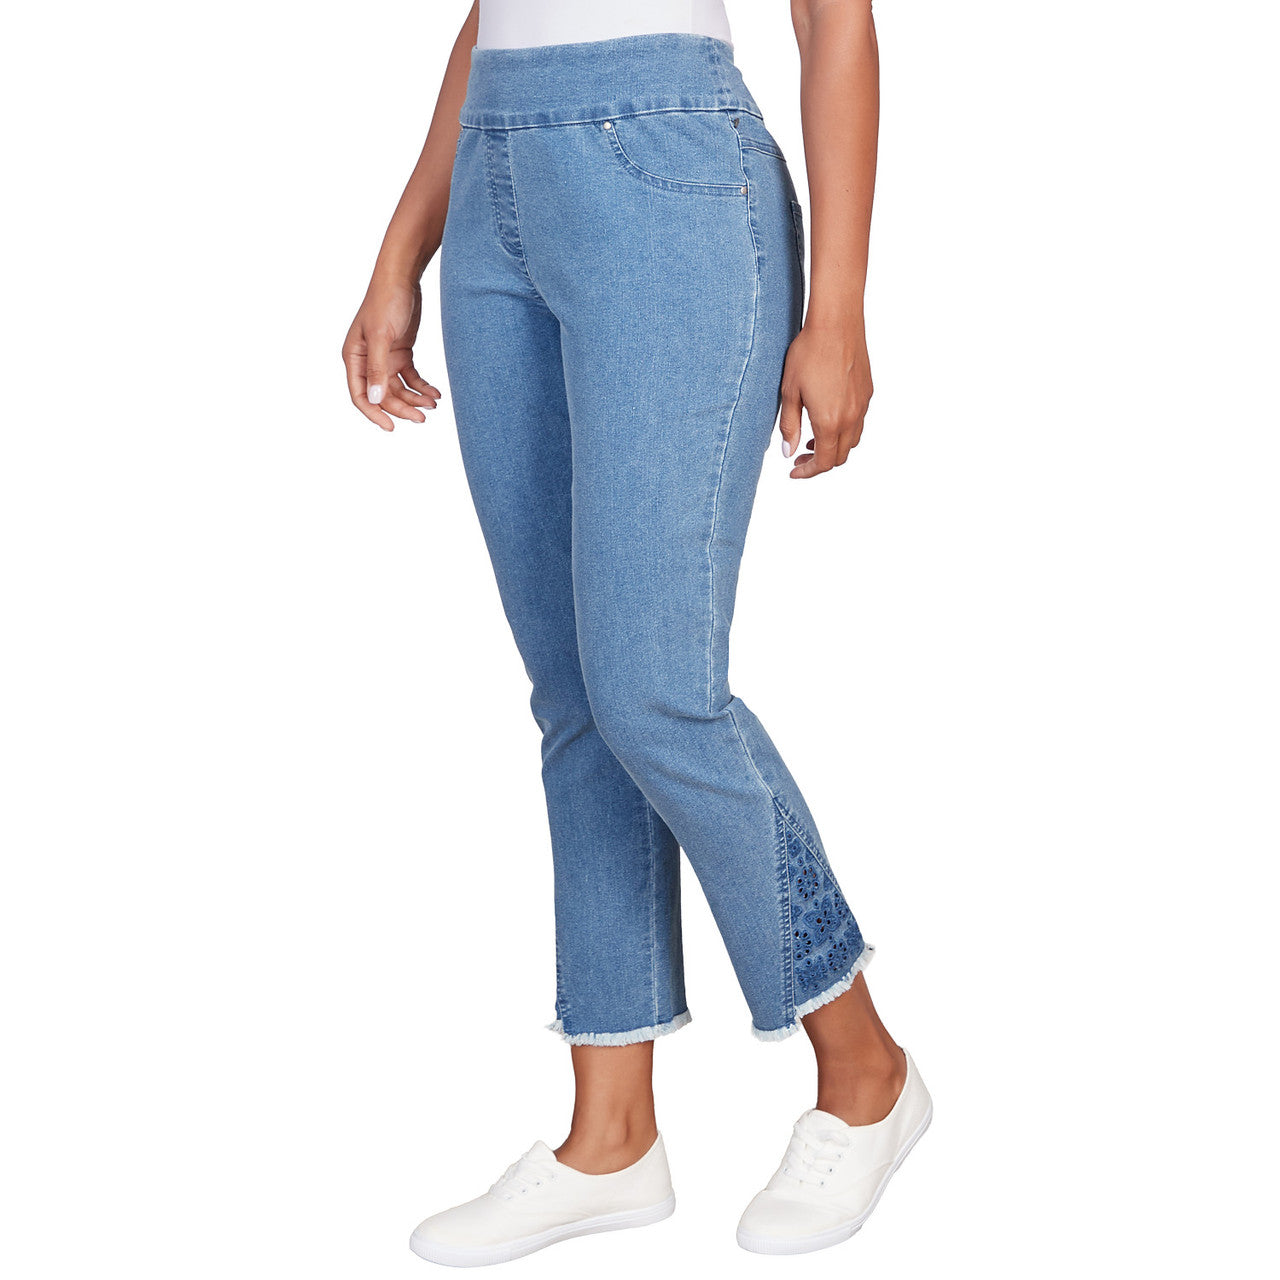 036- Ruby Road Embroidered Ankle Pull On Stretch Denim Jeans